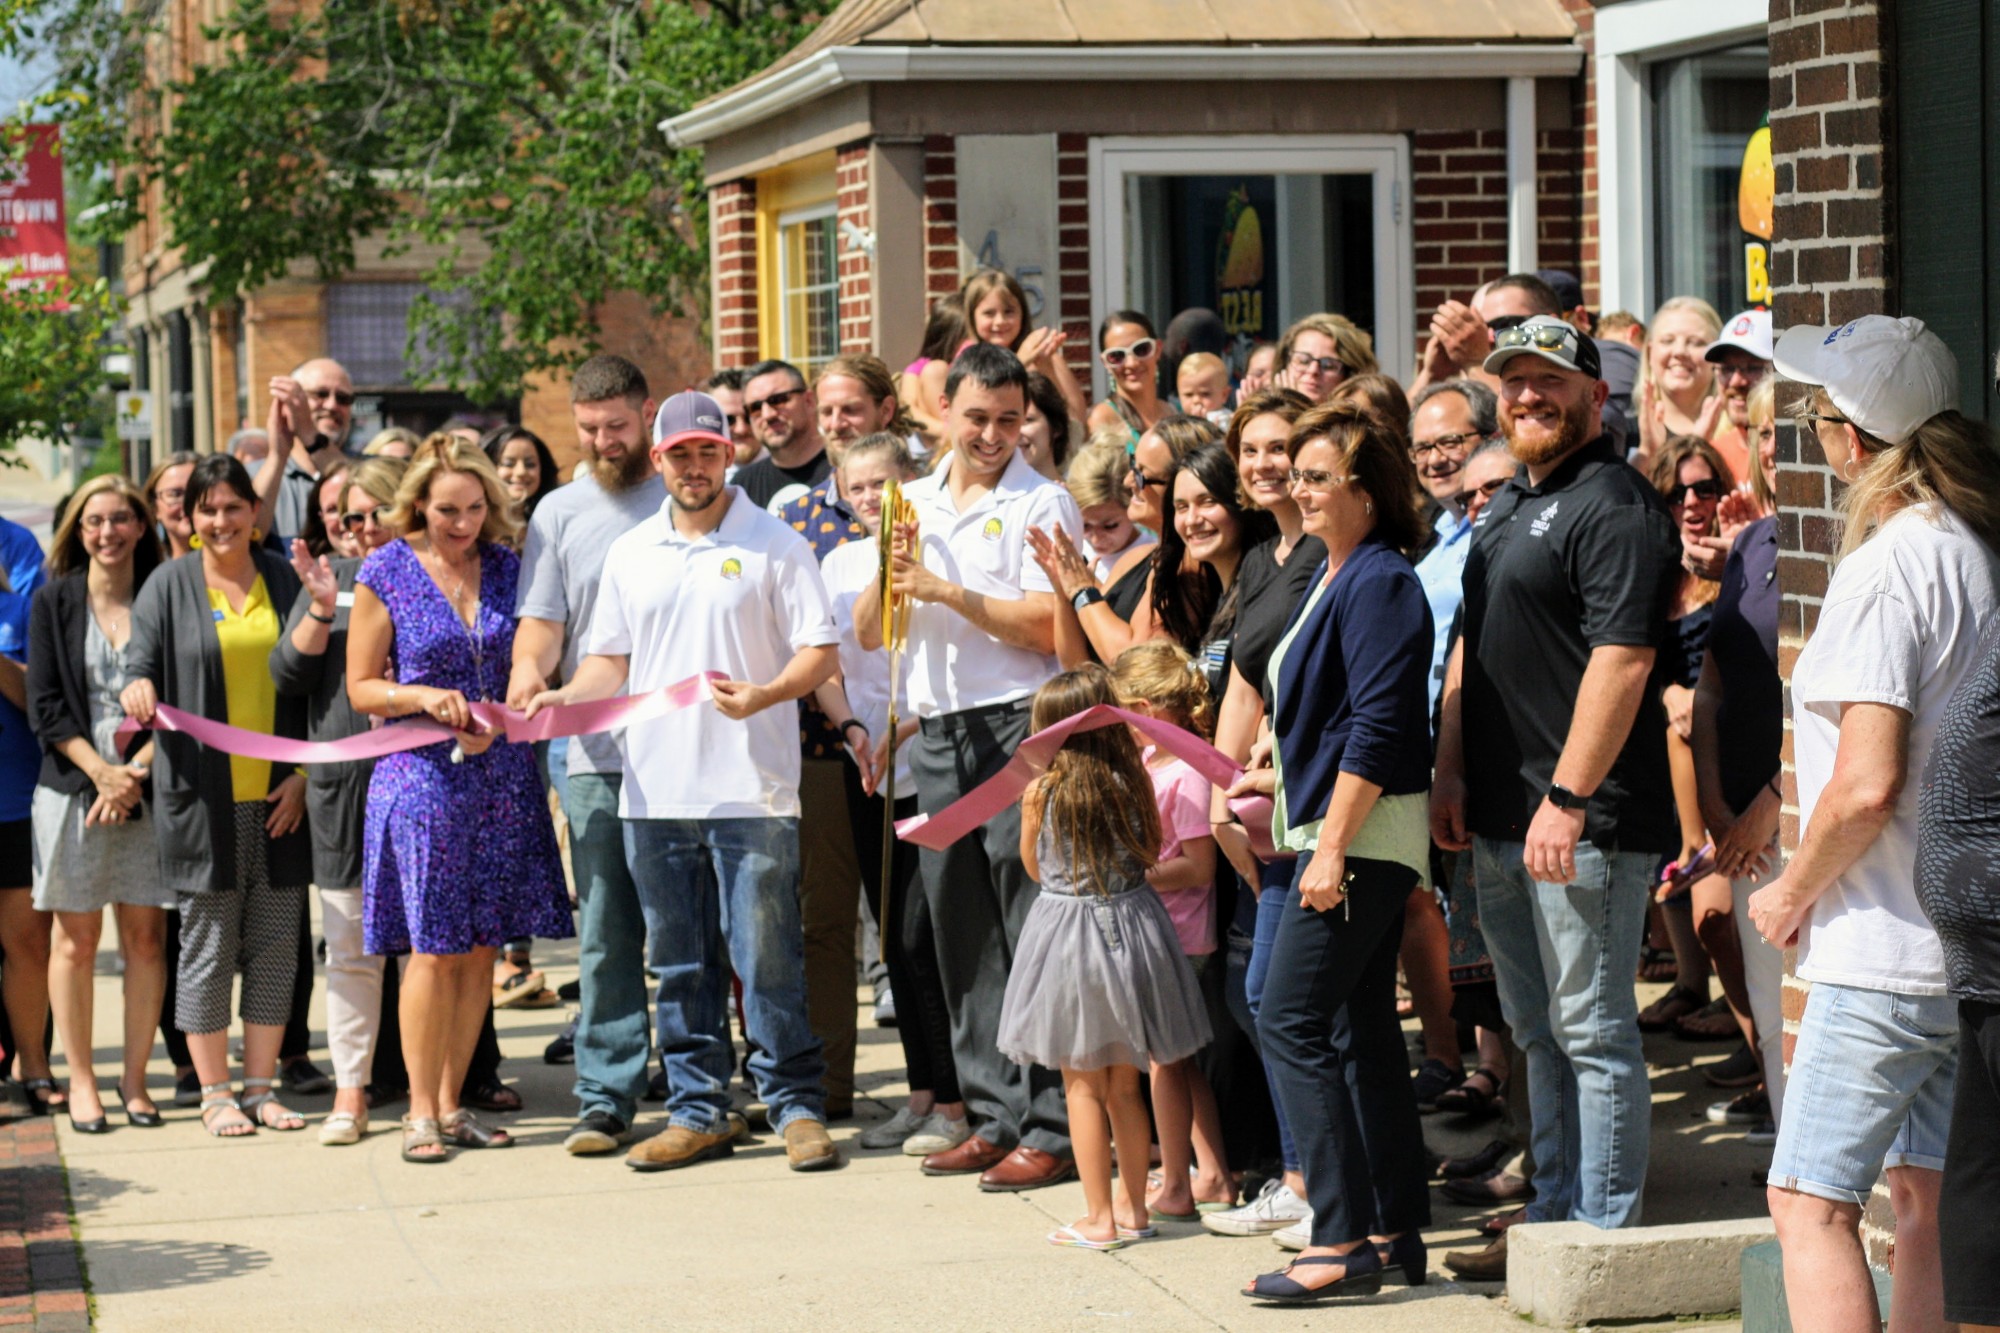 B.E.S.T. of Tiffin Celebrates Opening with Ribbon Cutting